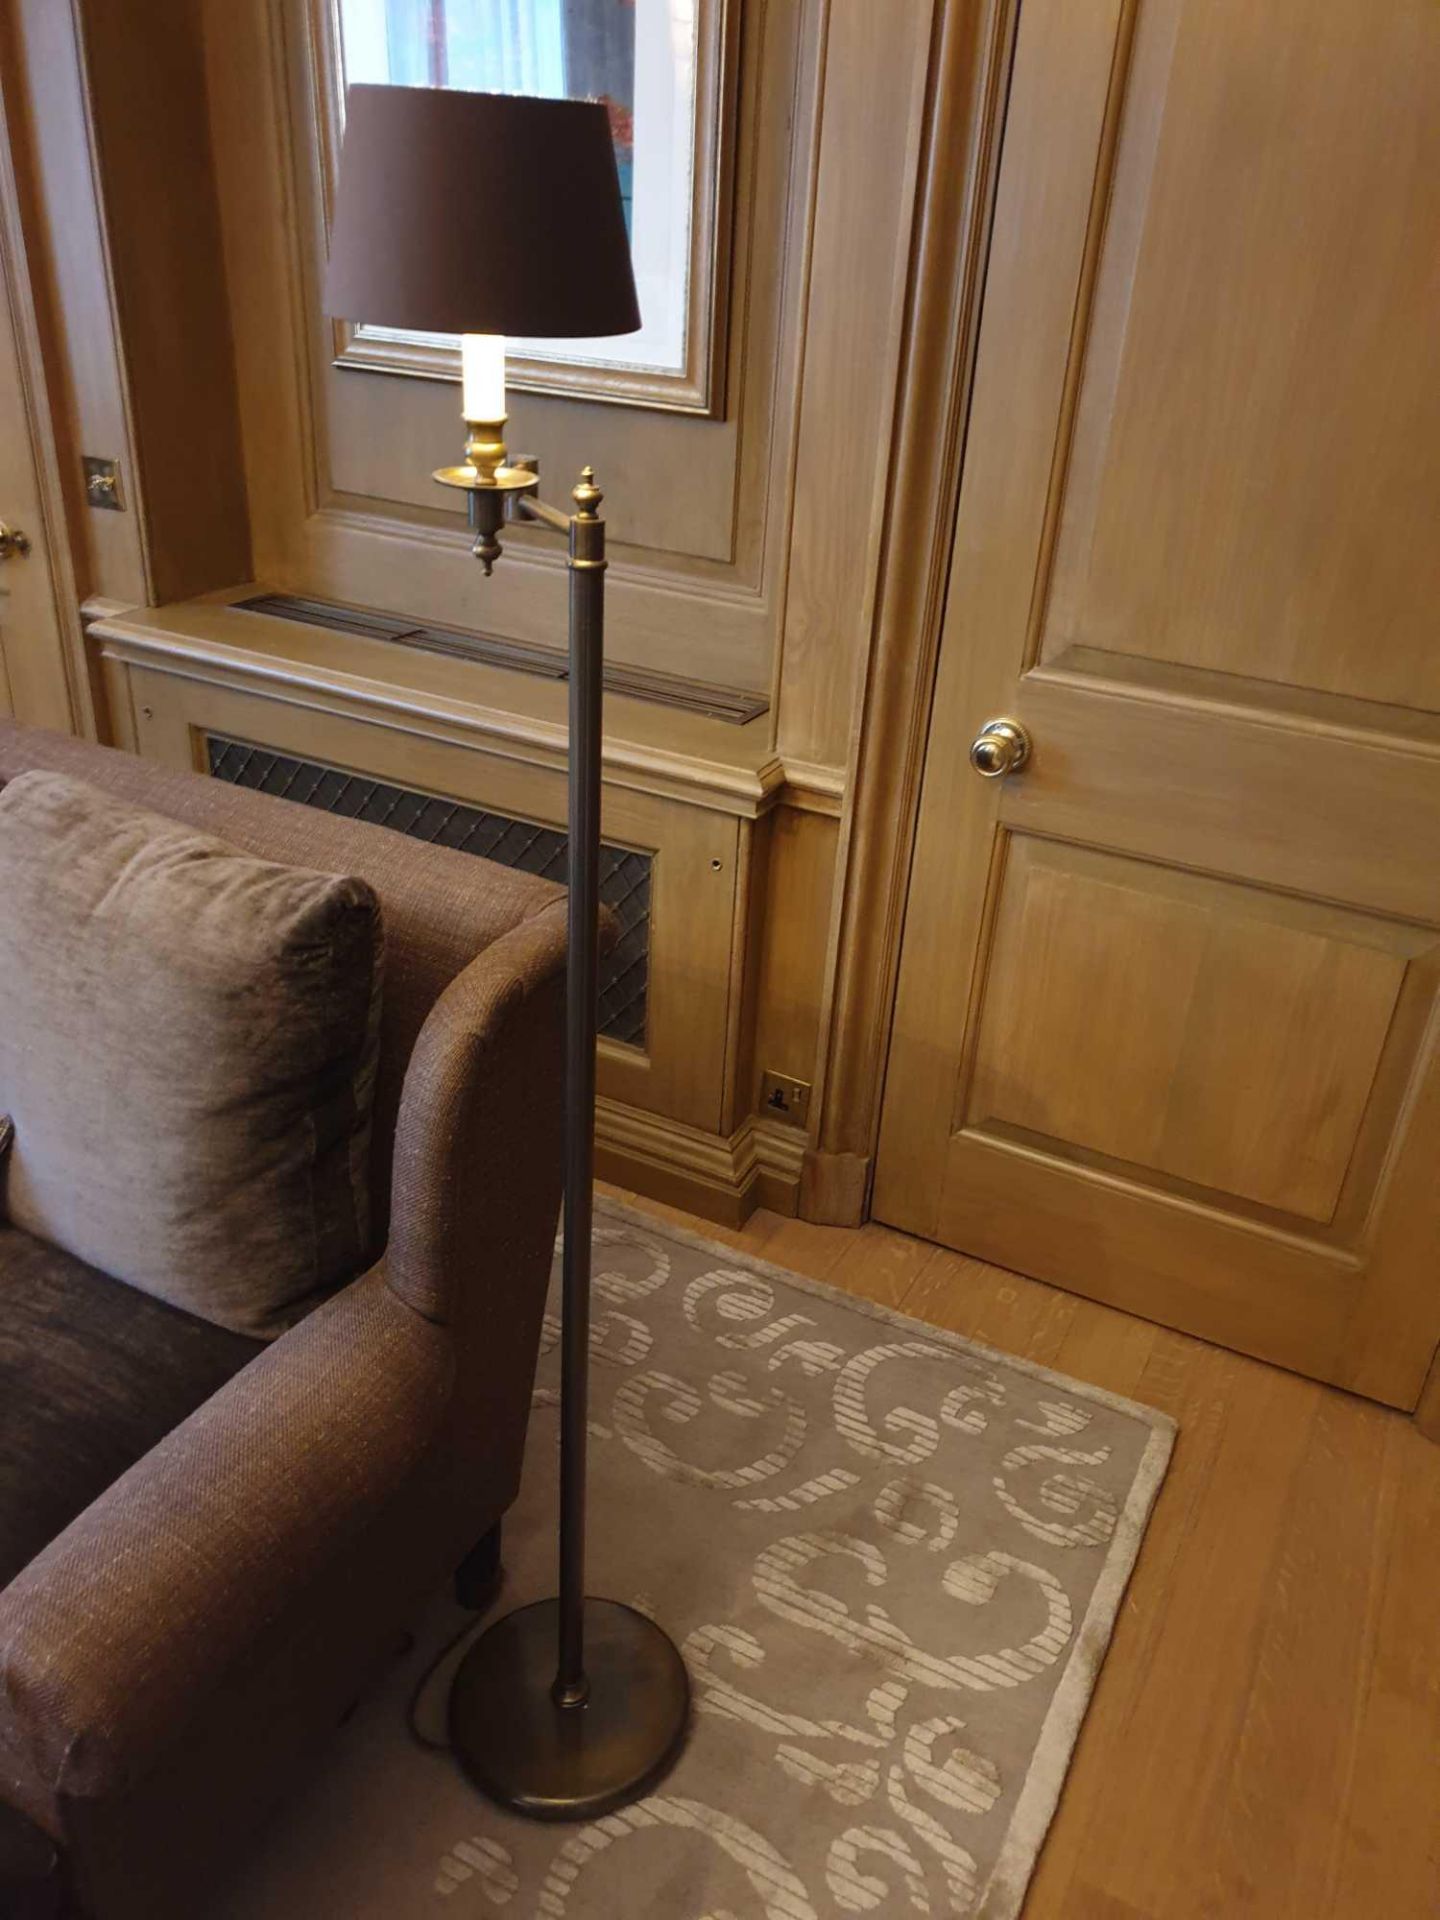 Library Floor Lamp Finished In English Bronze Swing Arm Function With Shade 156cm (Room 111) - Image 2 of 2